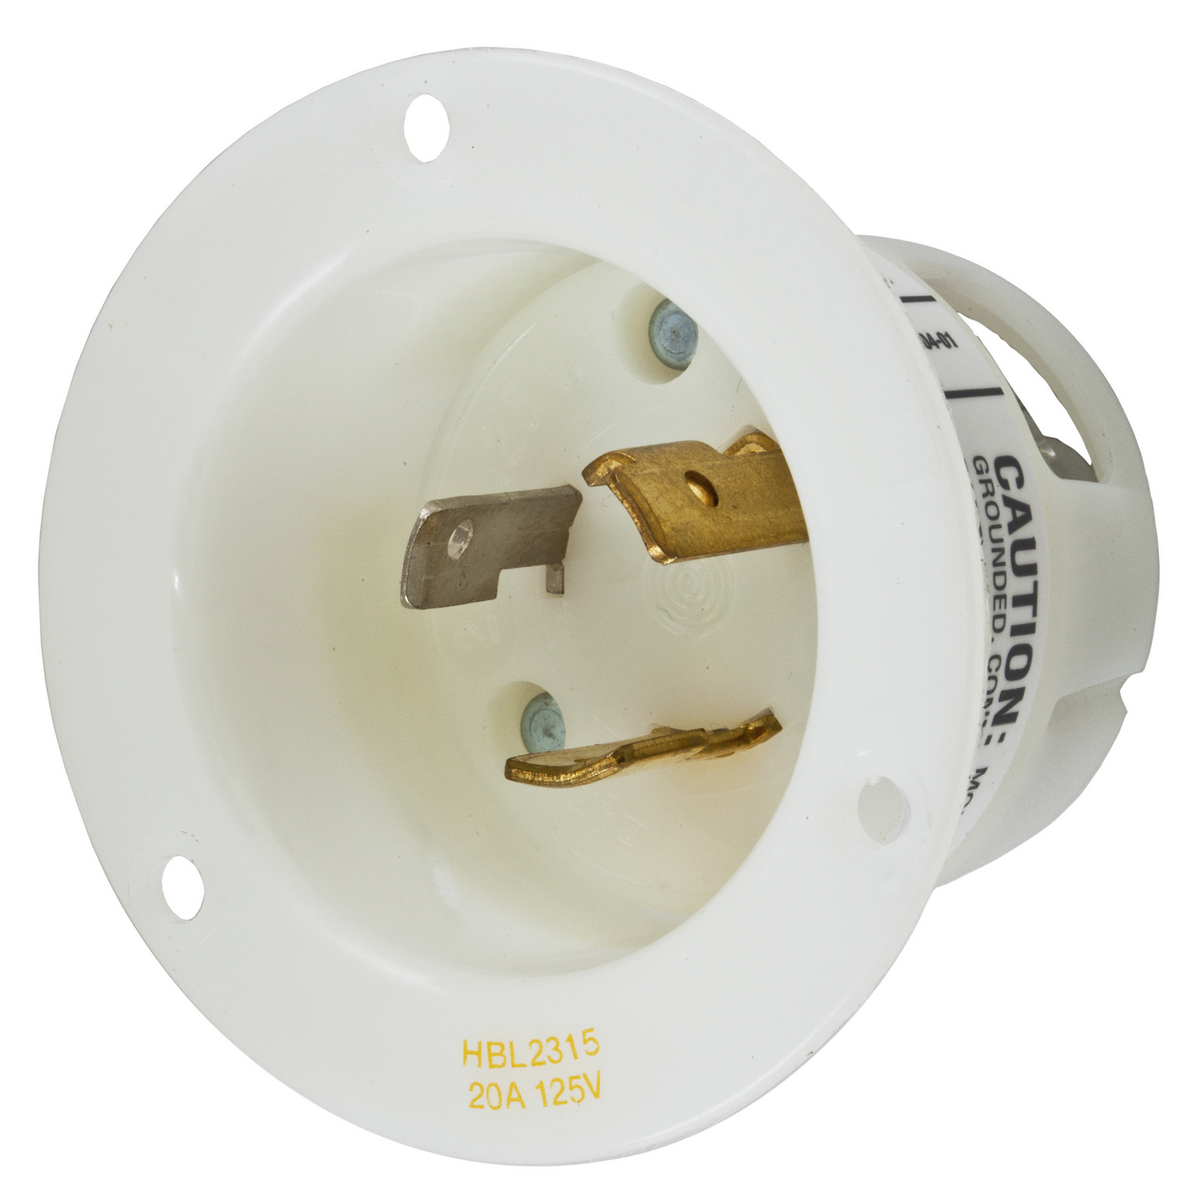 Details about   Hubbell HBL2311 TWIST-LOCK & Insulgrip Locking male 20 Amp 125V SOLD AS A LOT 